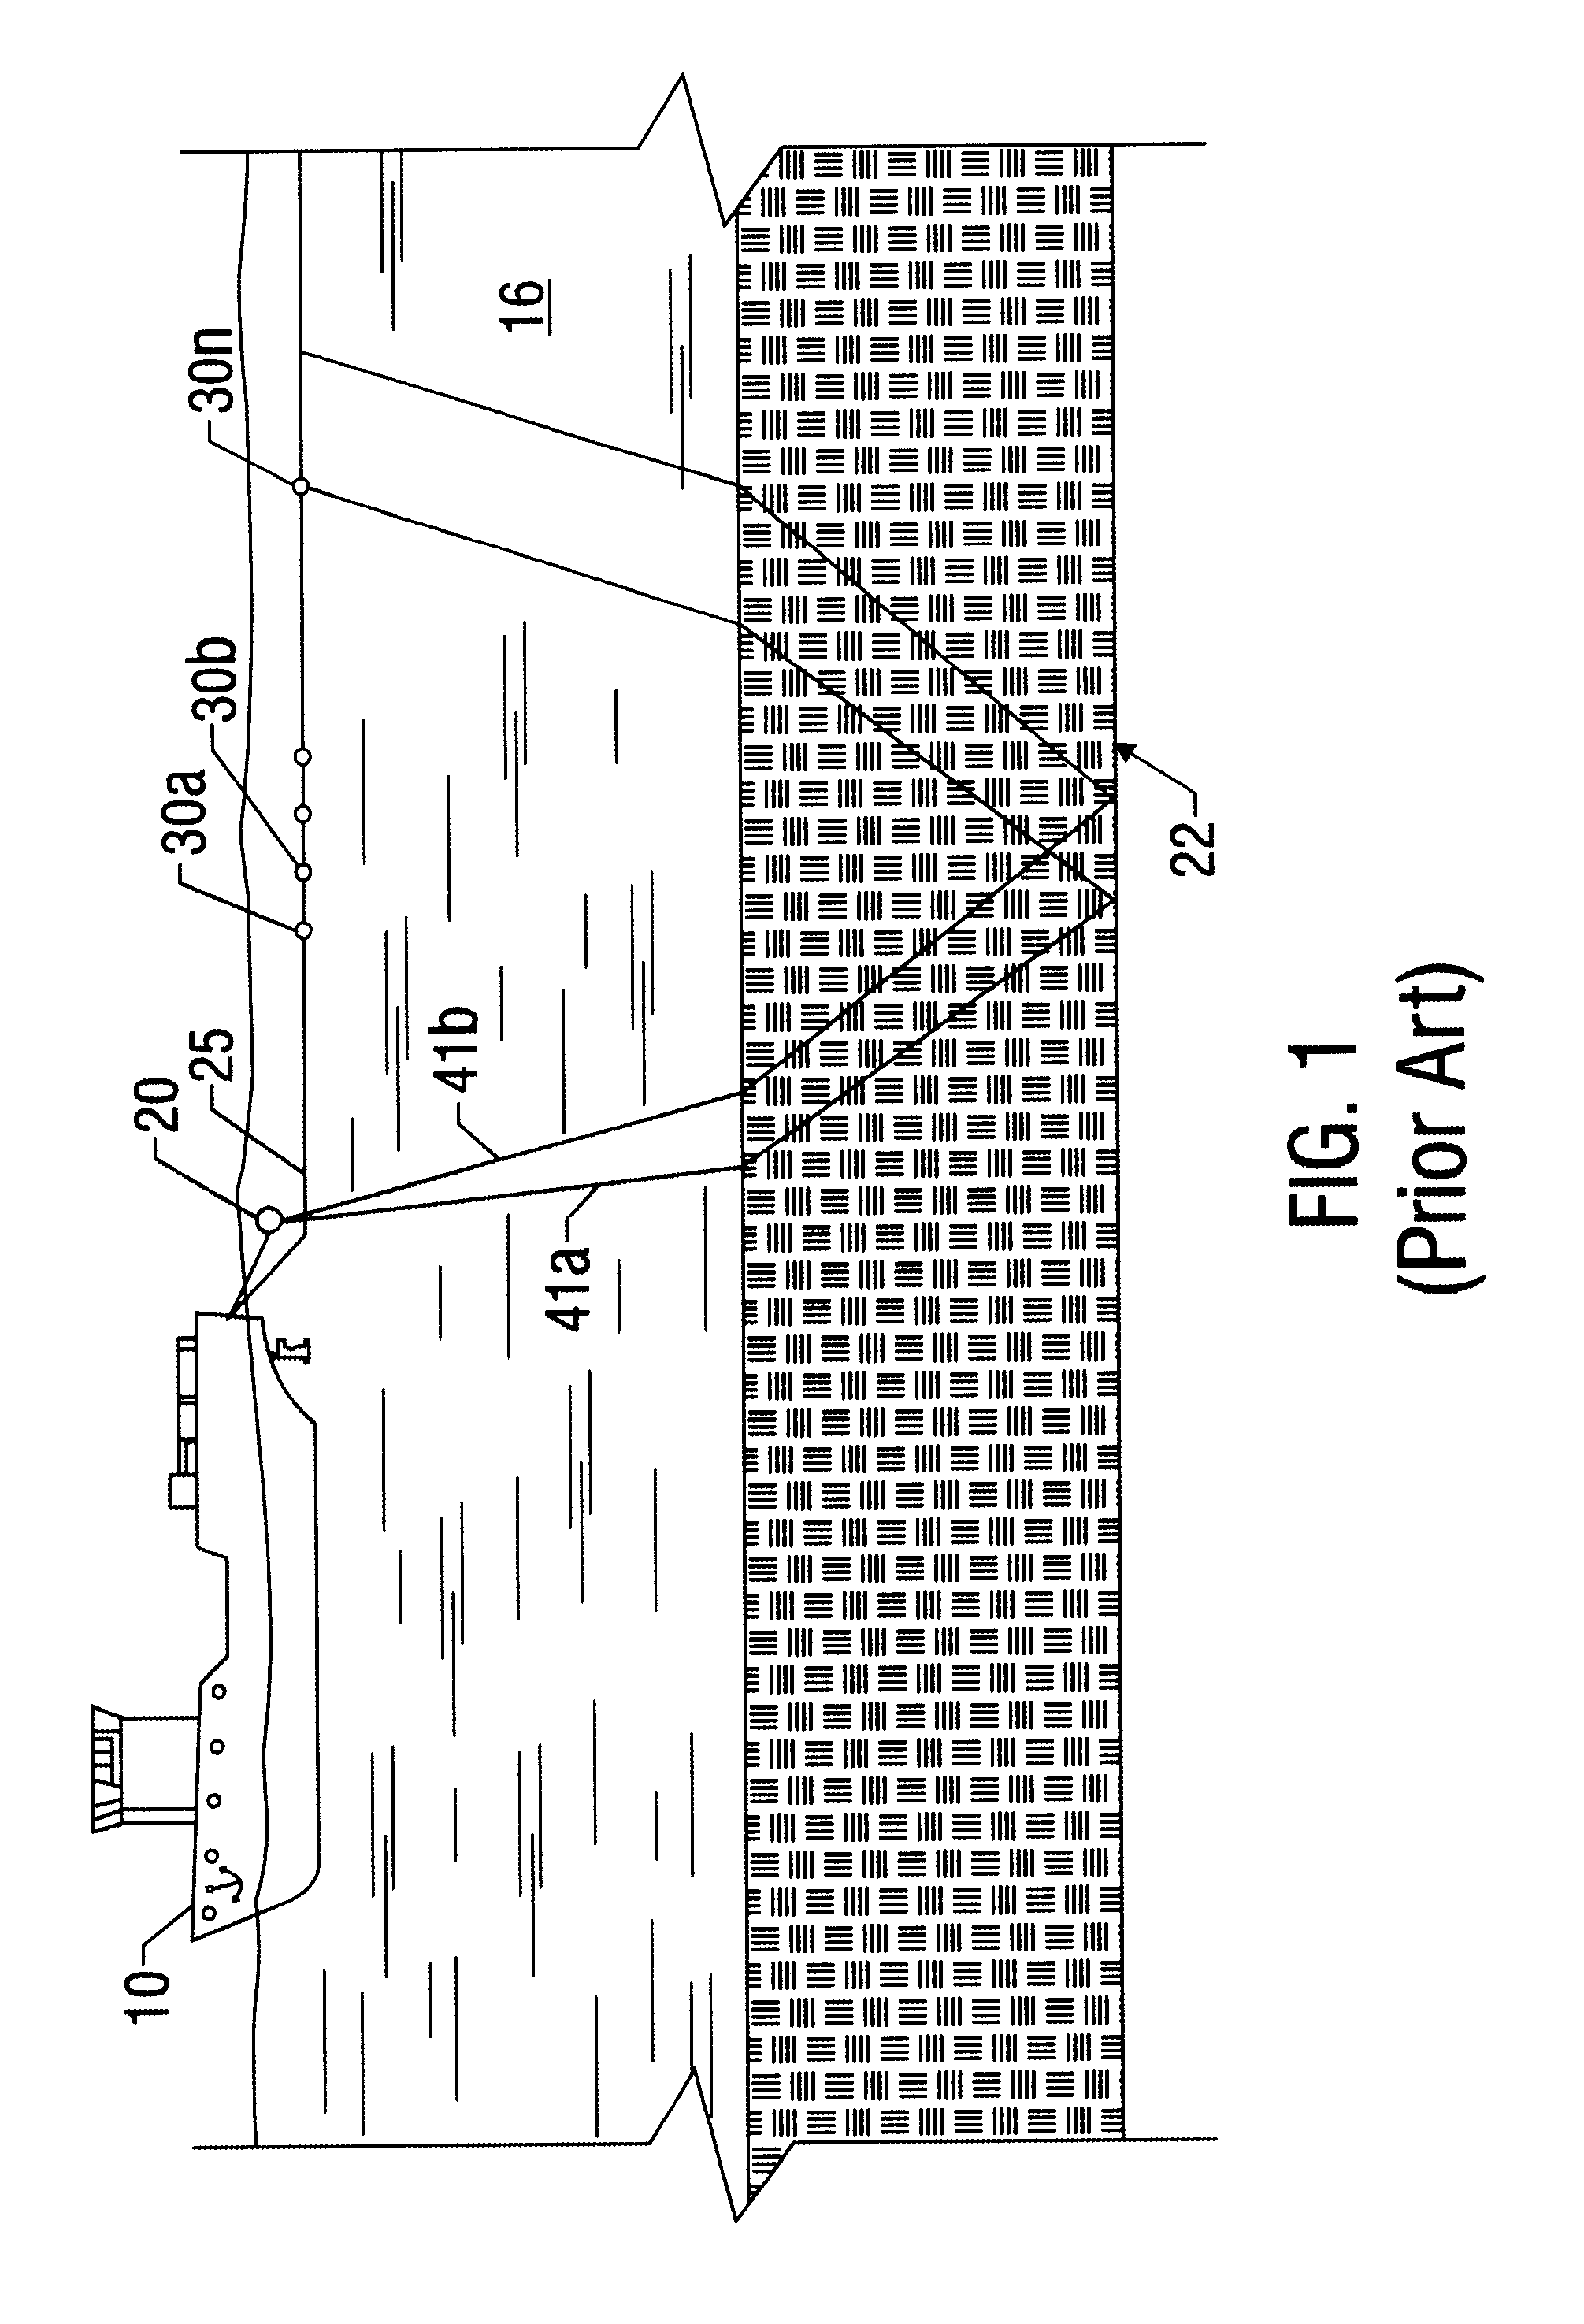 Method and apparatus for the assimilation and visualization of information from 3D data volumes